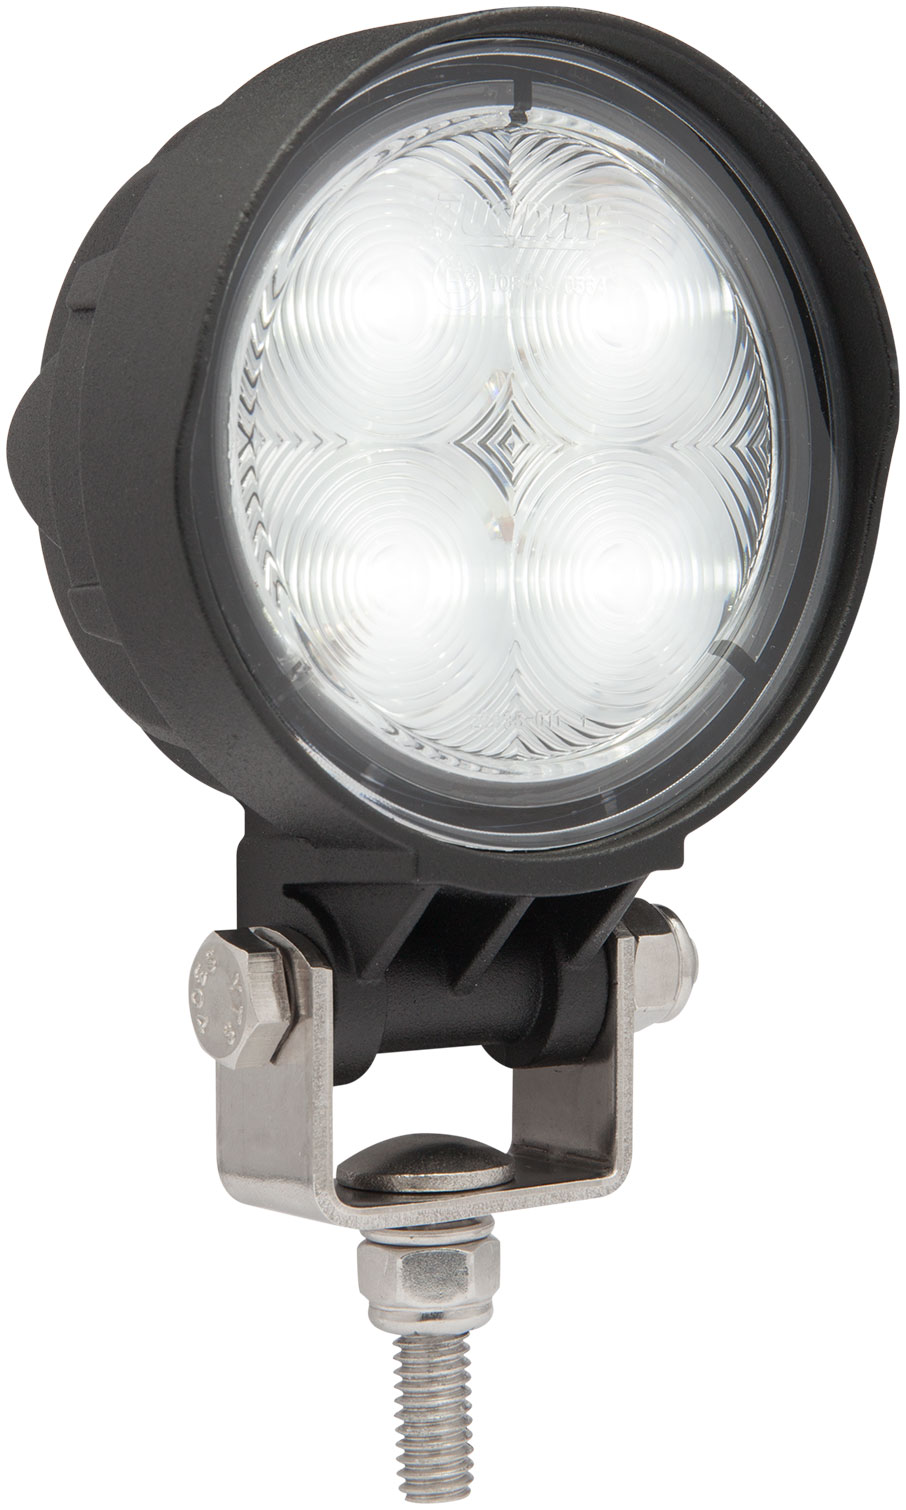 Optronics broadened its highly price-competitive Opti-Brite work lamp line by eight products, including a new super-bright miniature work lamp.